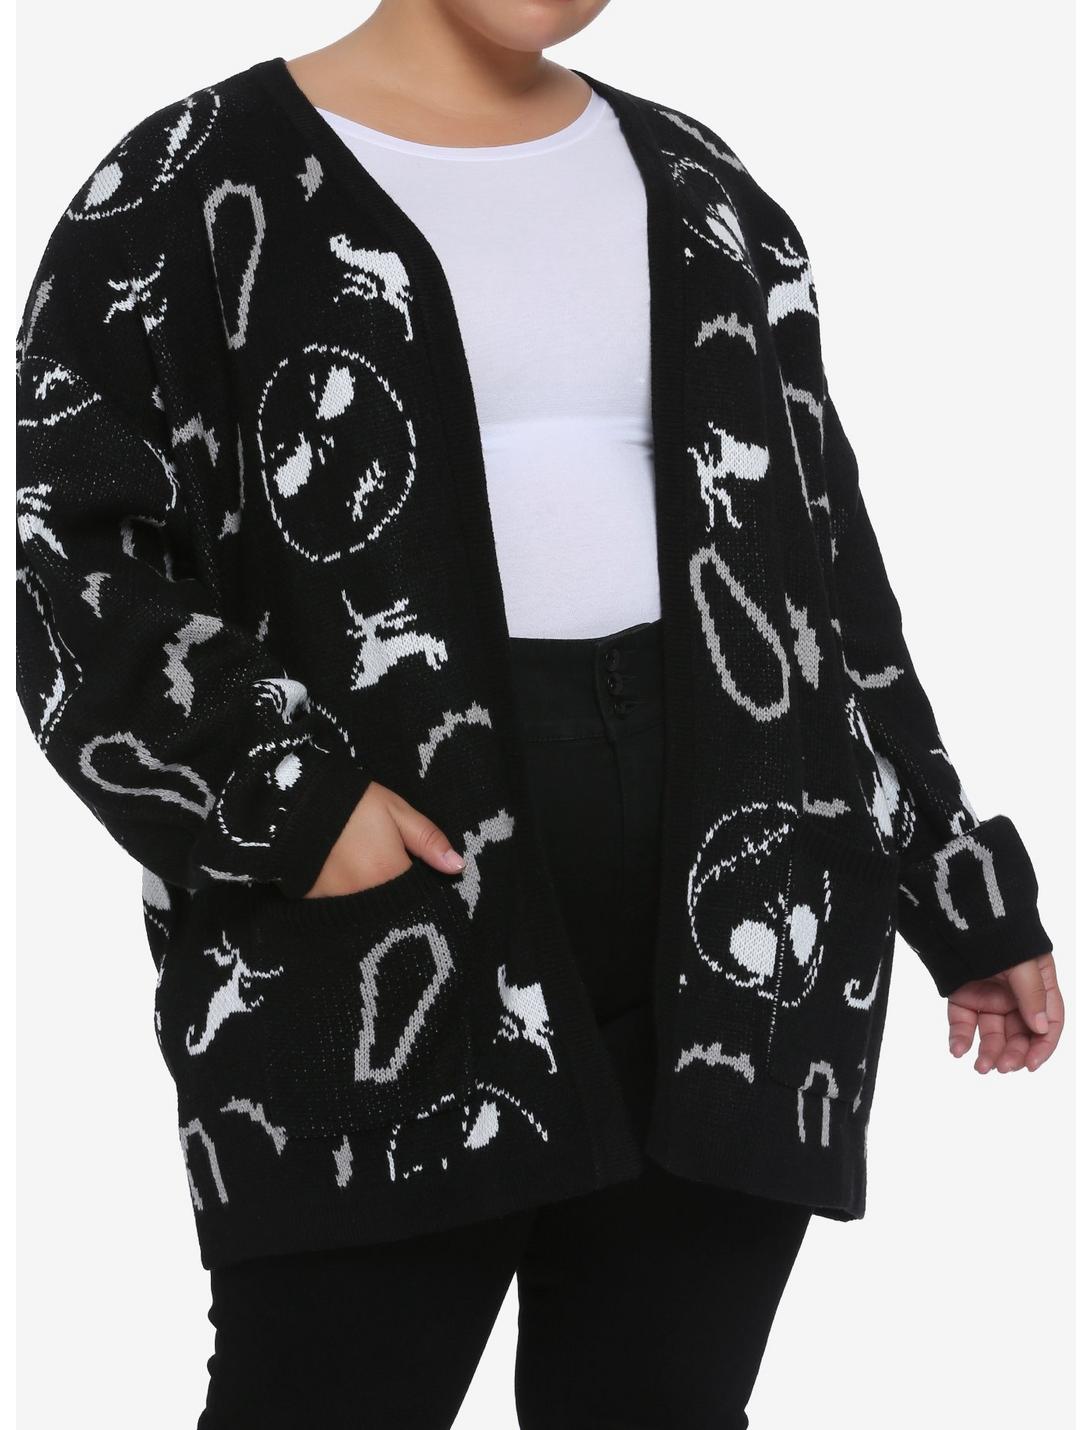 The Nightmare Before Christmas Back Lacing Girls Open Cardigan Plus Size, WHITE, hi-res